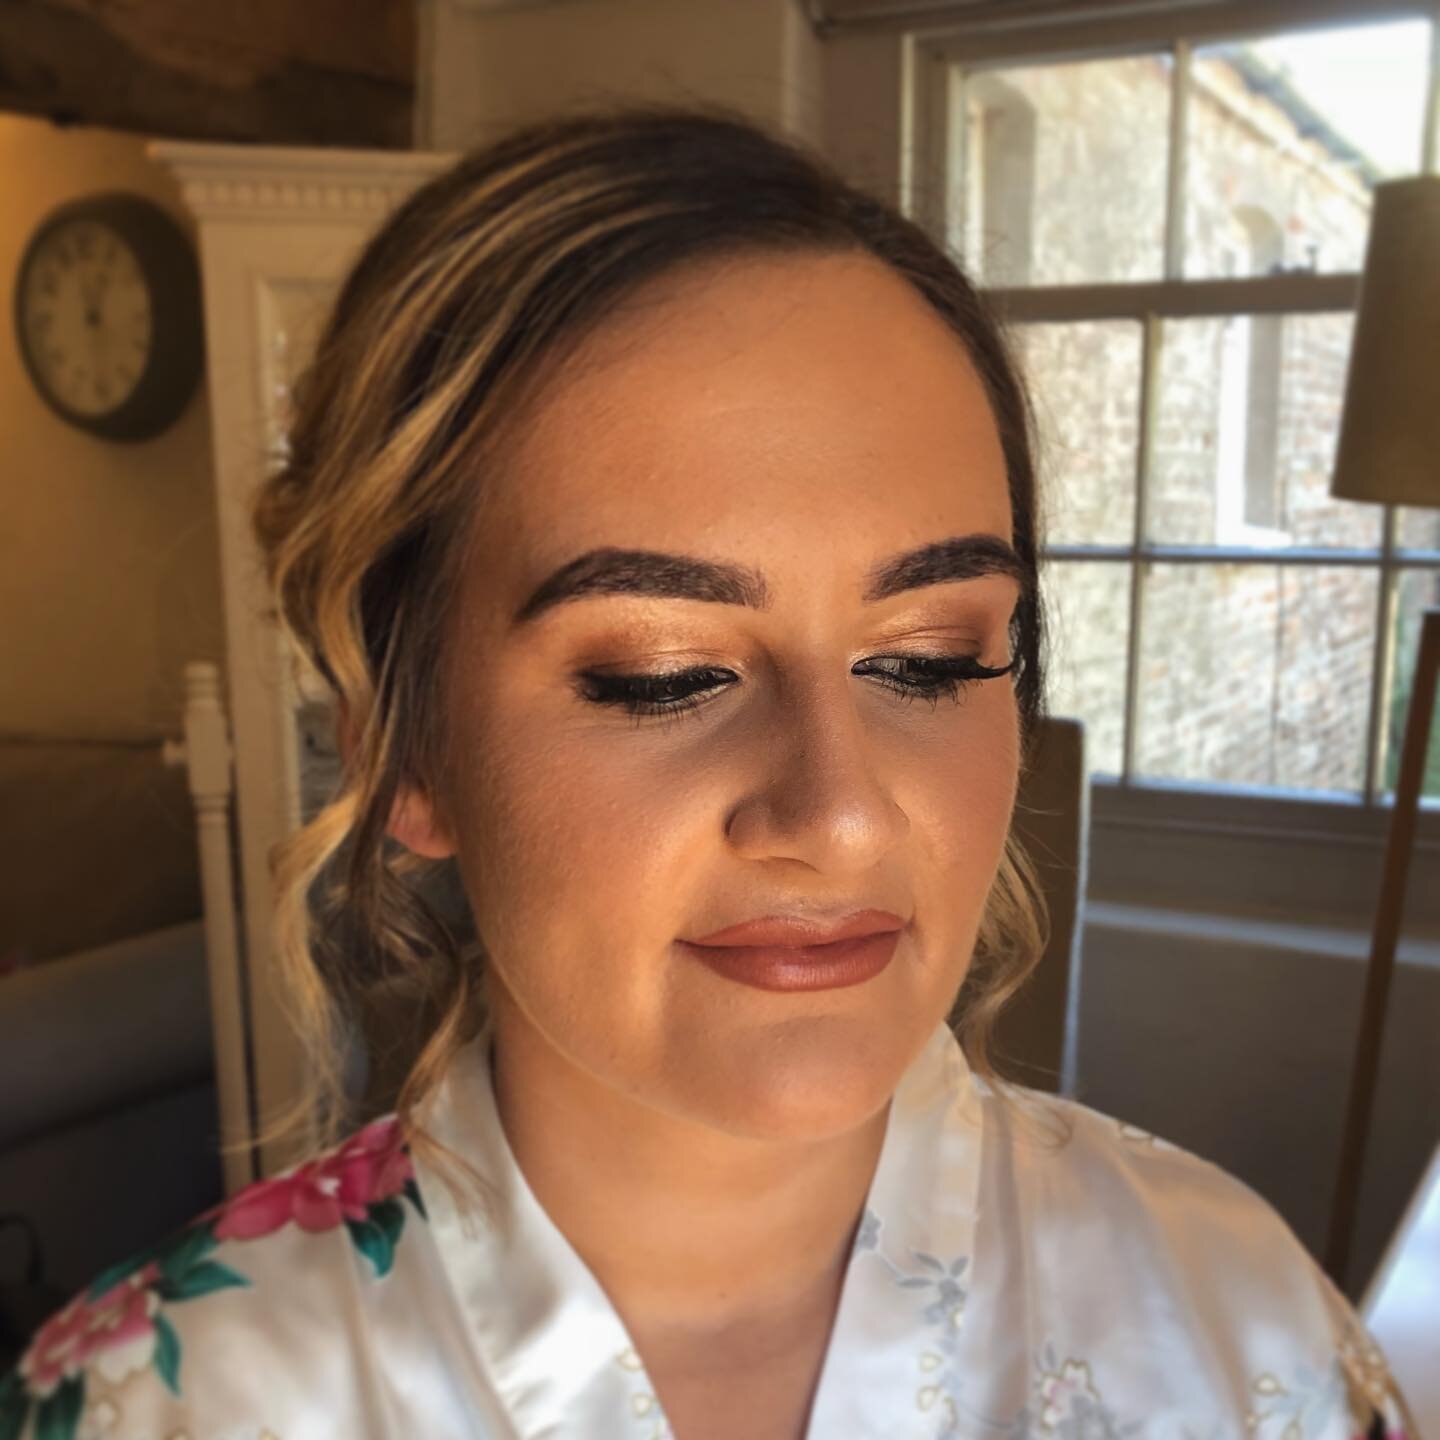 Another beautiful bridesmaid I had the pleasure of working with. With these hard times I&rsquo;m really feeling for all of my 2020 brides but remember when the big day comes it will be so so worth the wait and I cannot wait to paint faces again once 